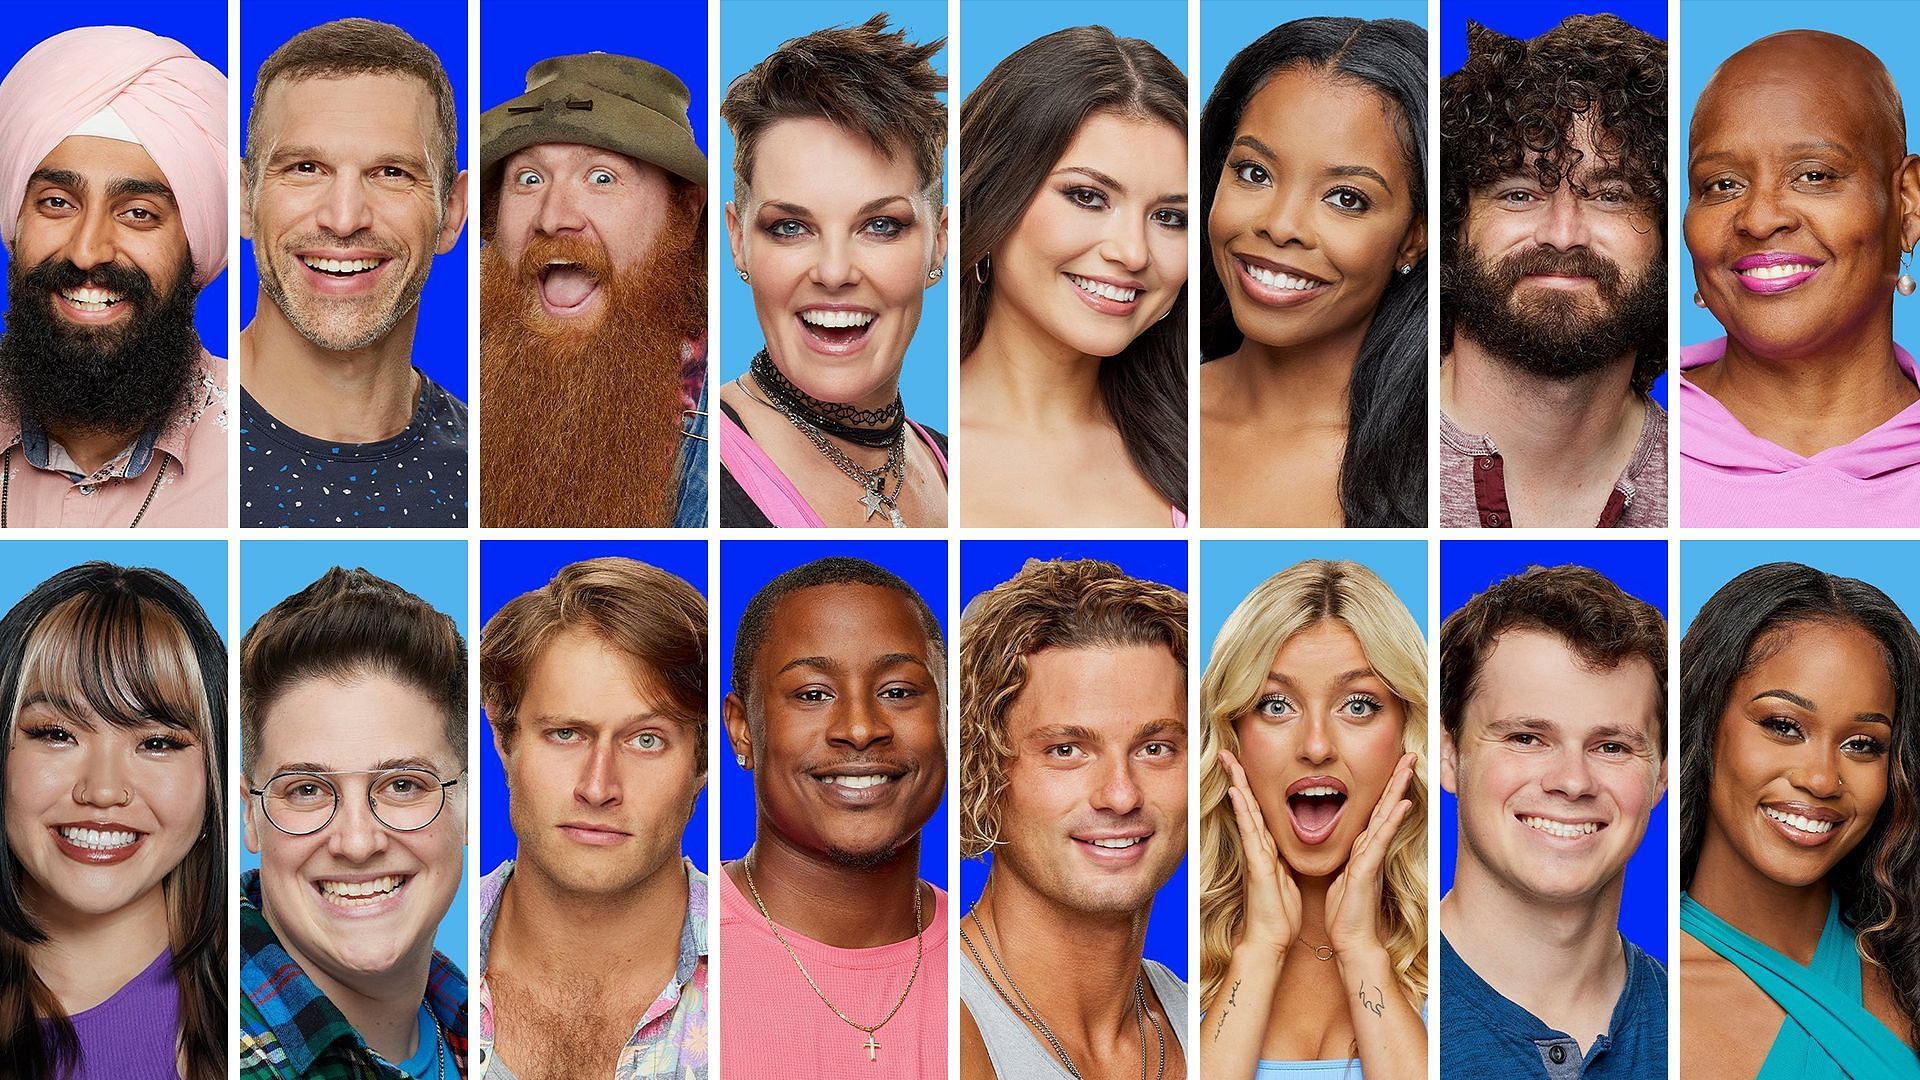 Big Brother season 25 houseguests gunning for the ultimate prize. (Images via Instagram/@bigbrothercbs)